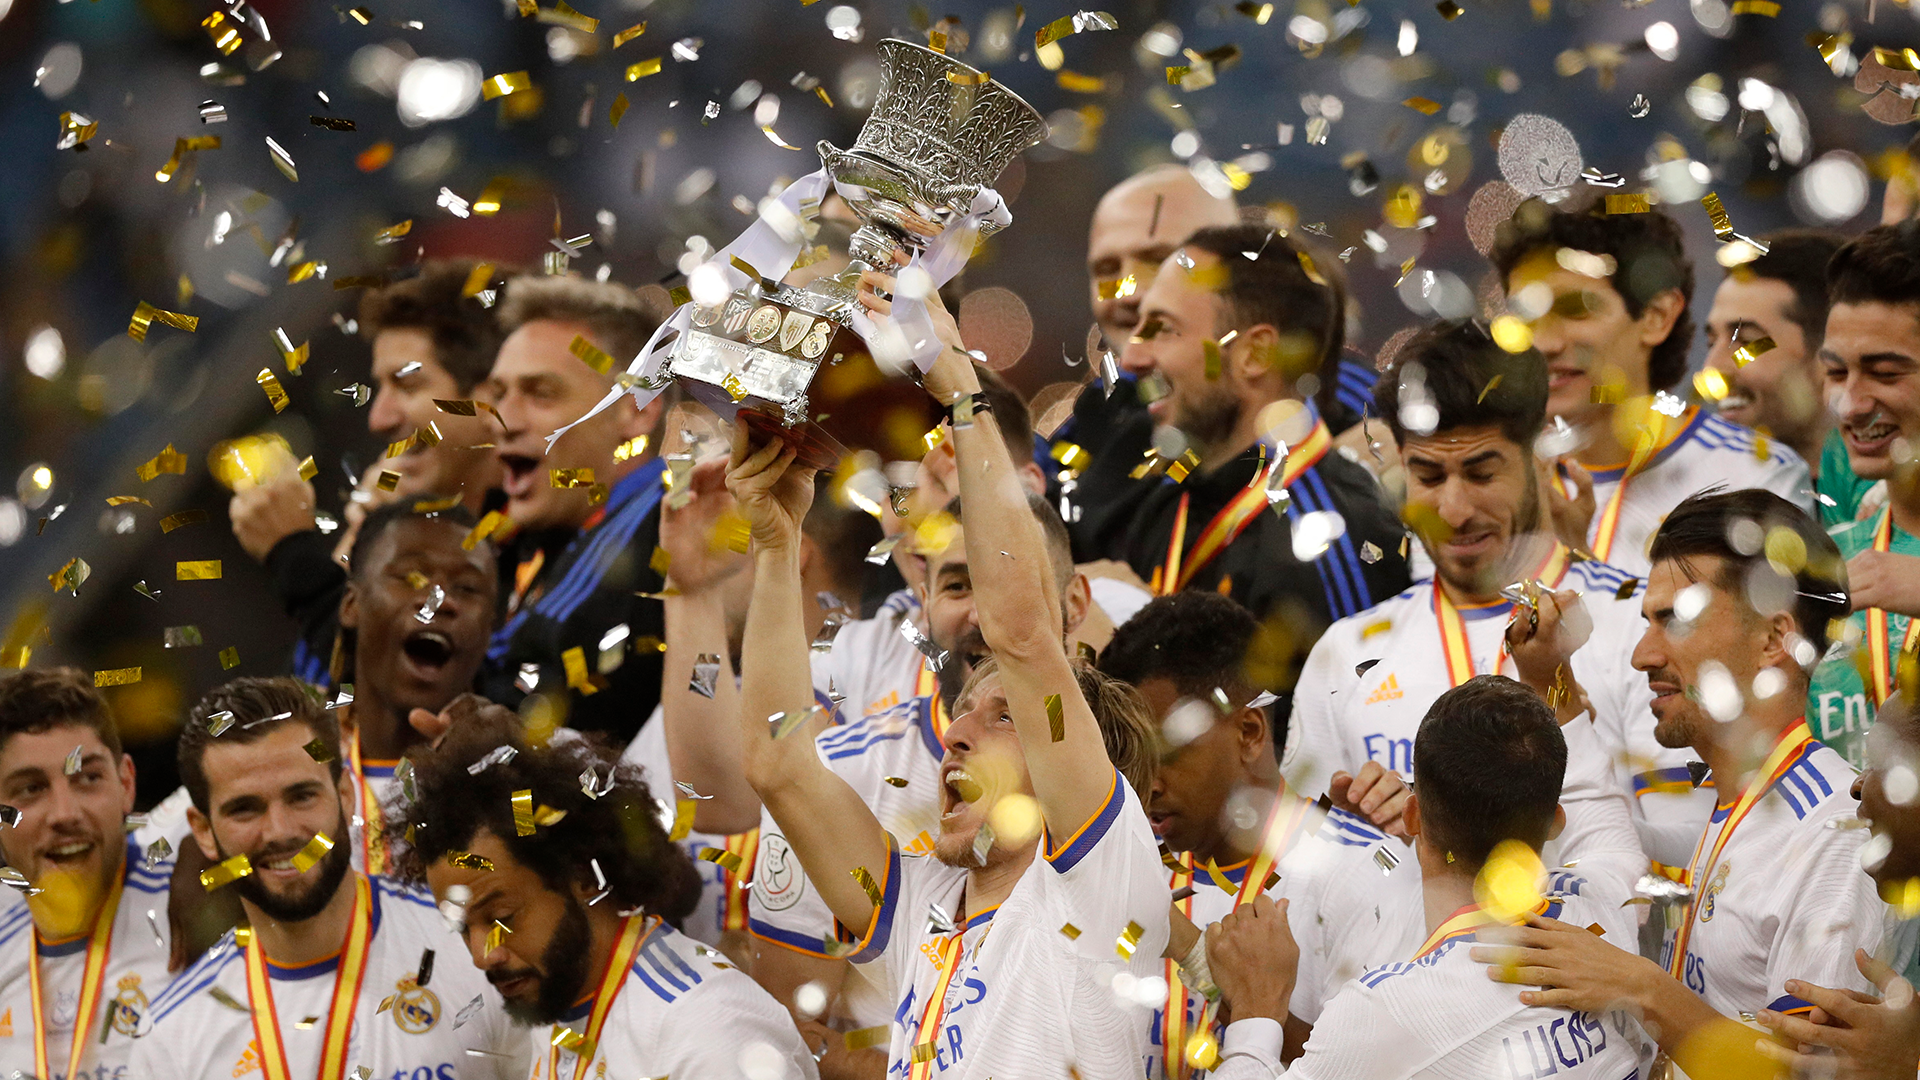 Spanish Super Cup Final: Real beat Bilbao 2-0 to win 12th title